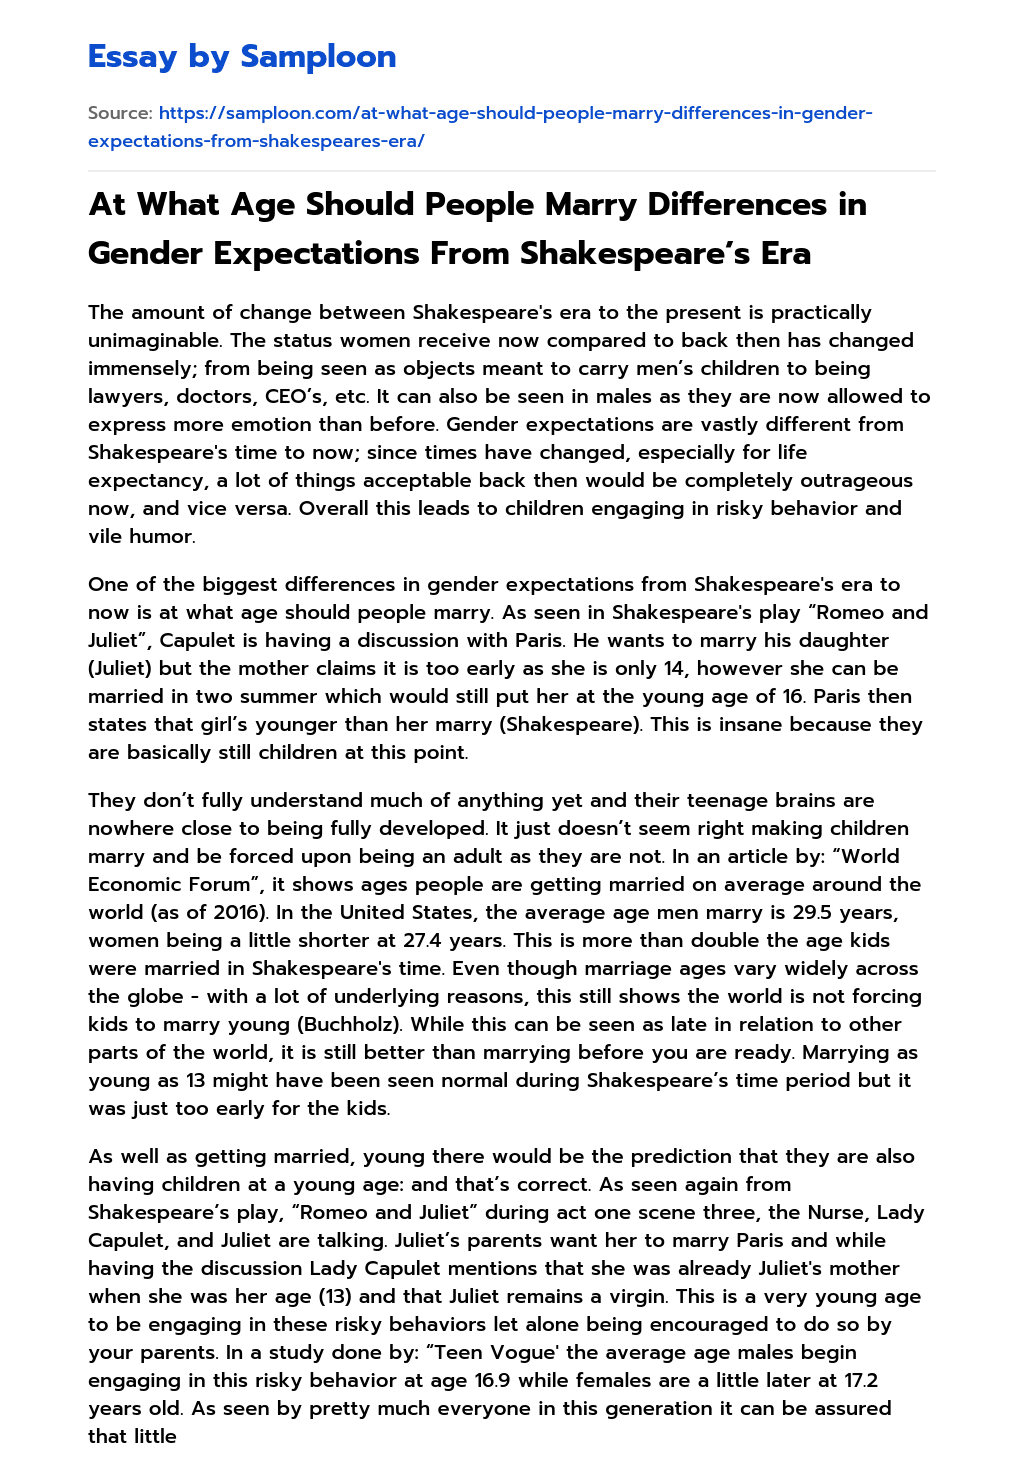 At What Age Should People Marry Differences in Gender Expectations From Shakespeare’s Era essay